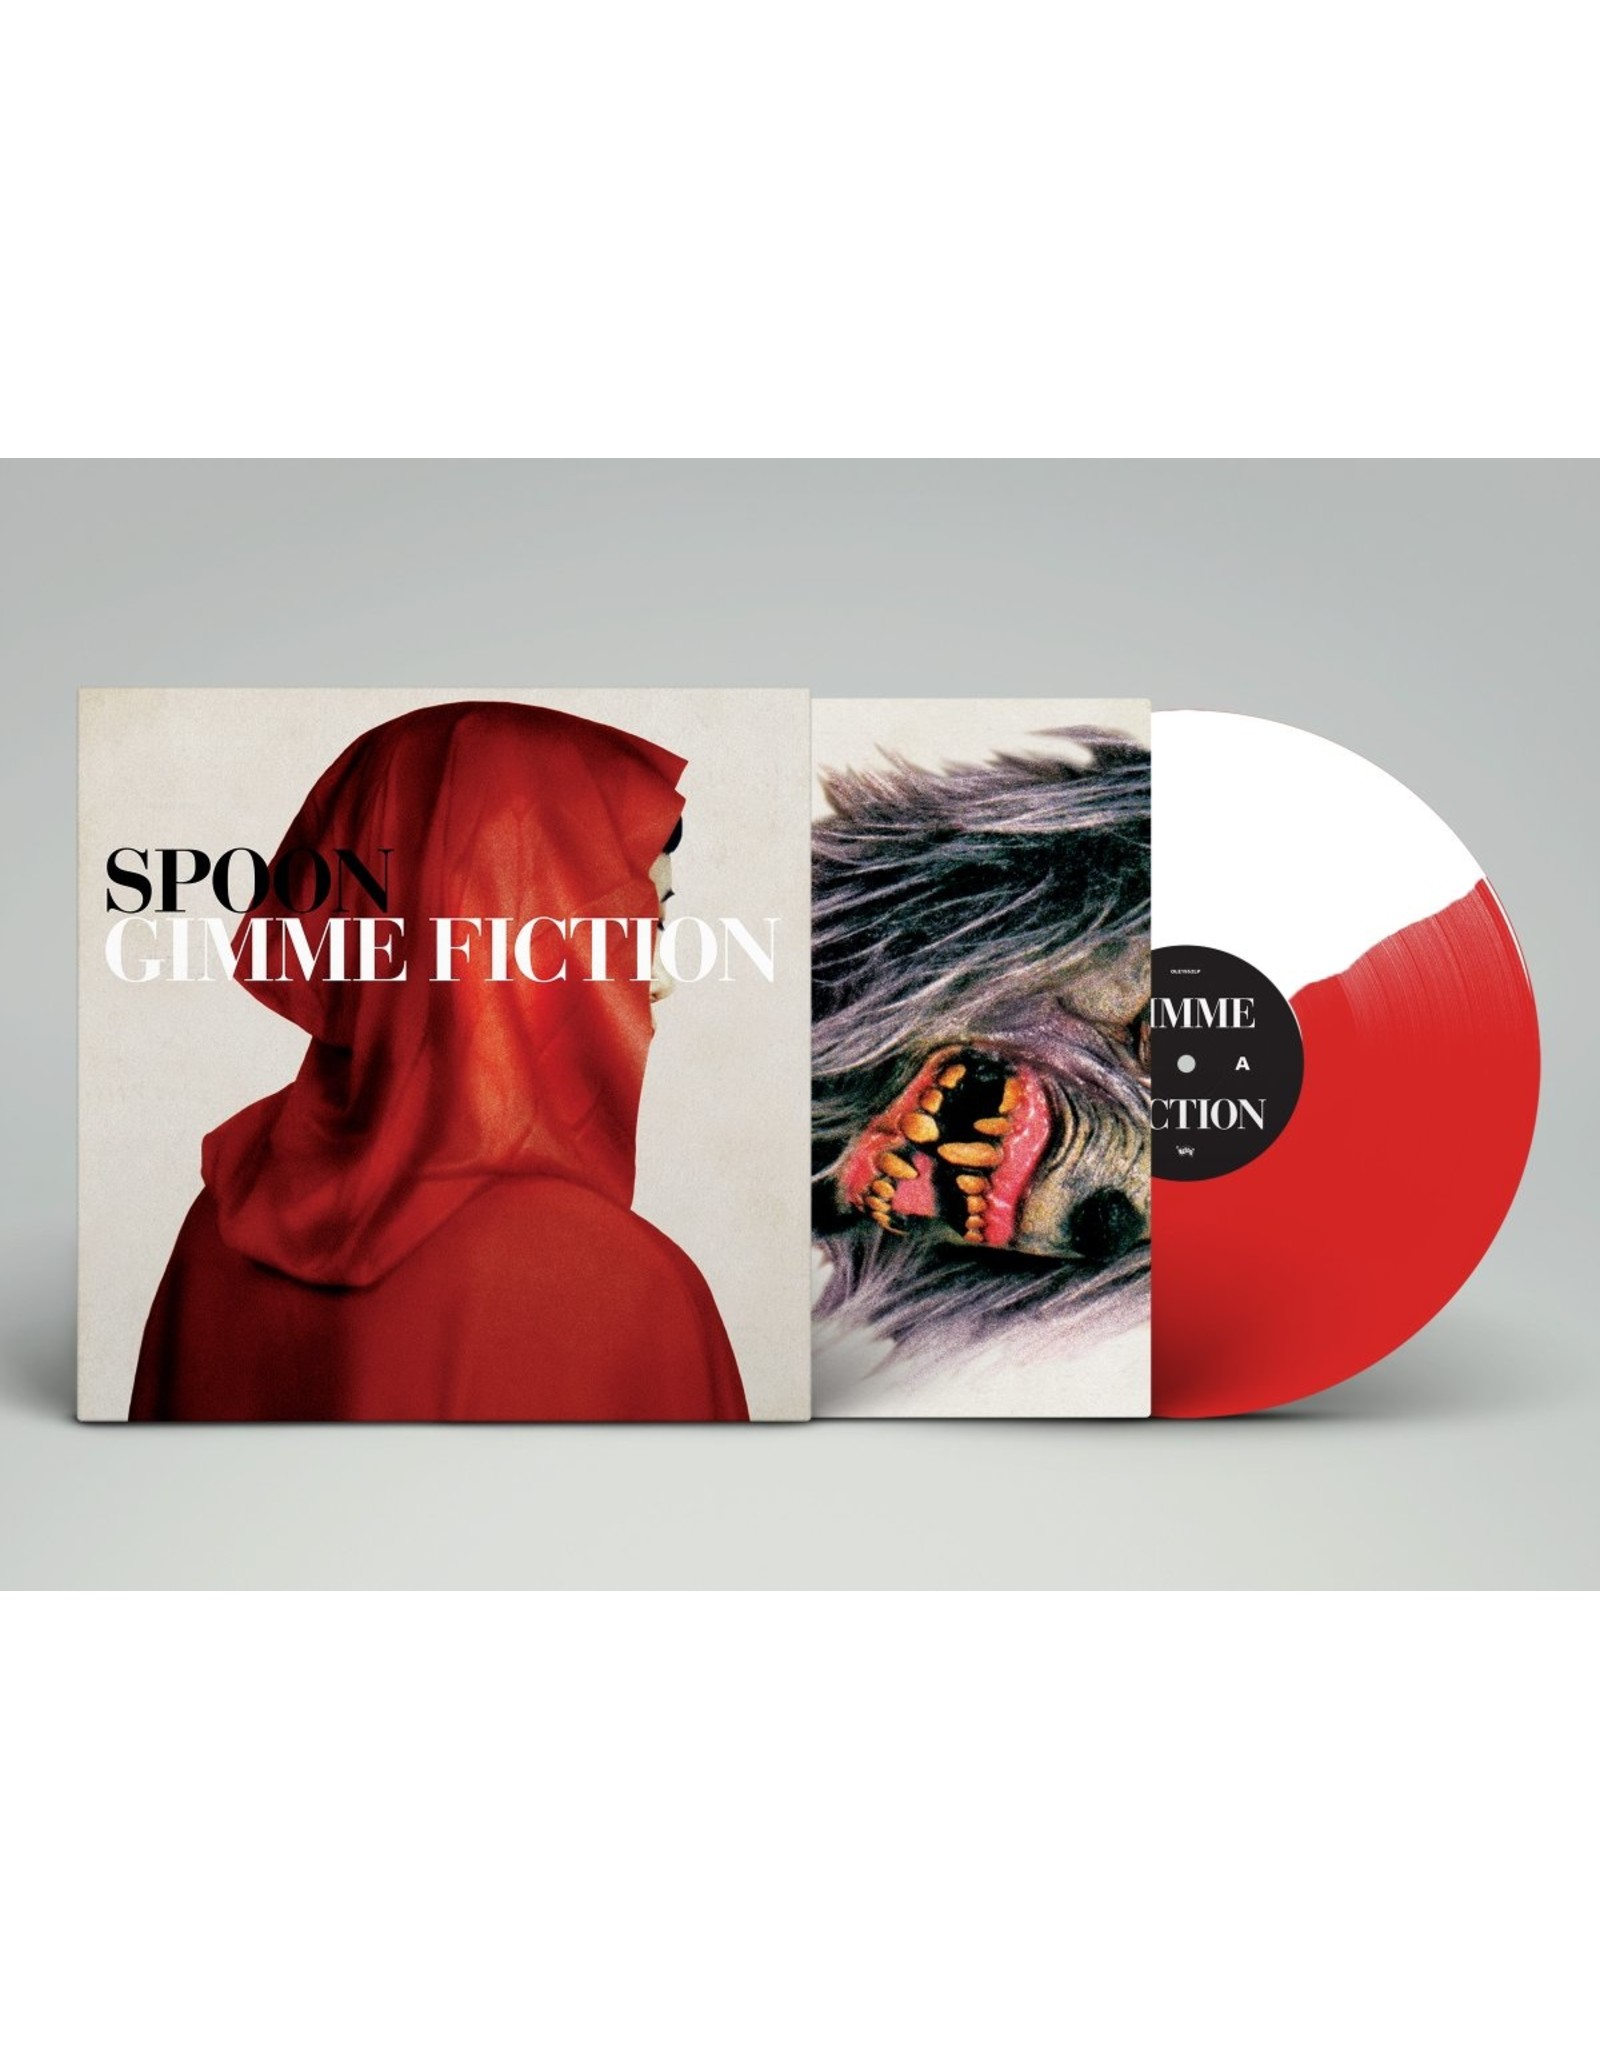 Spoon - Gimme Fiction (Red / White Vinyl)